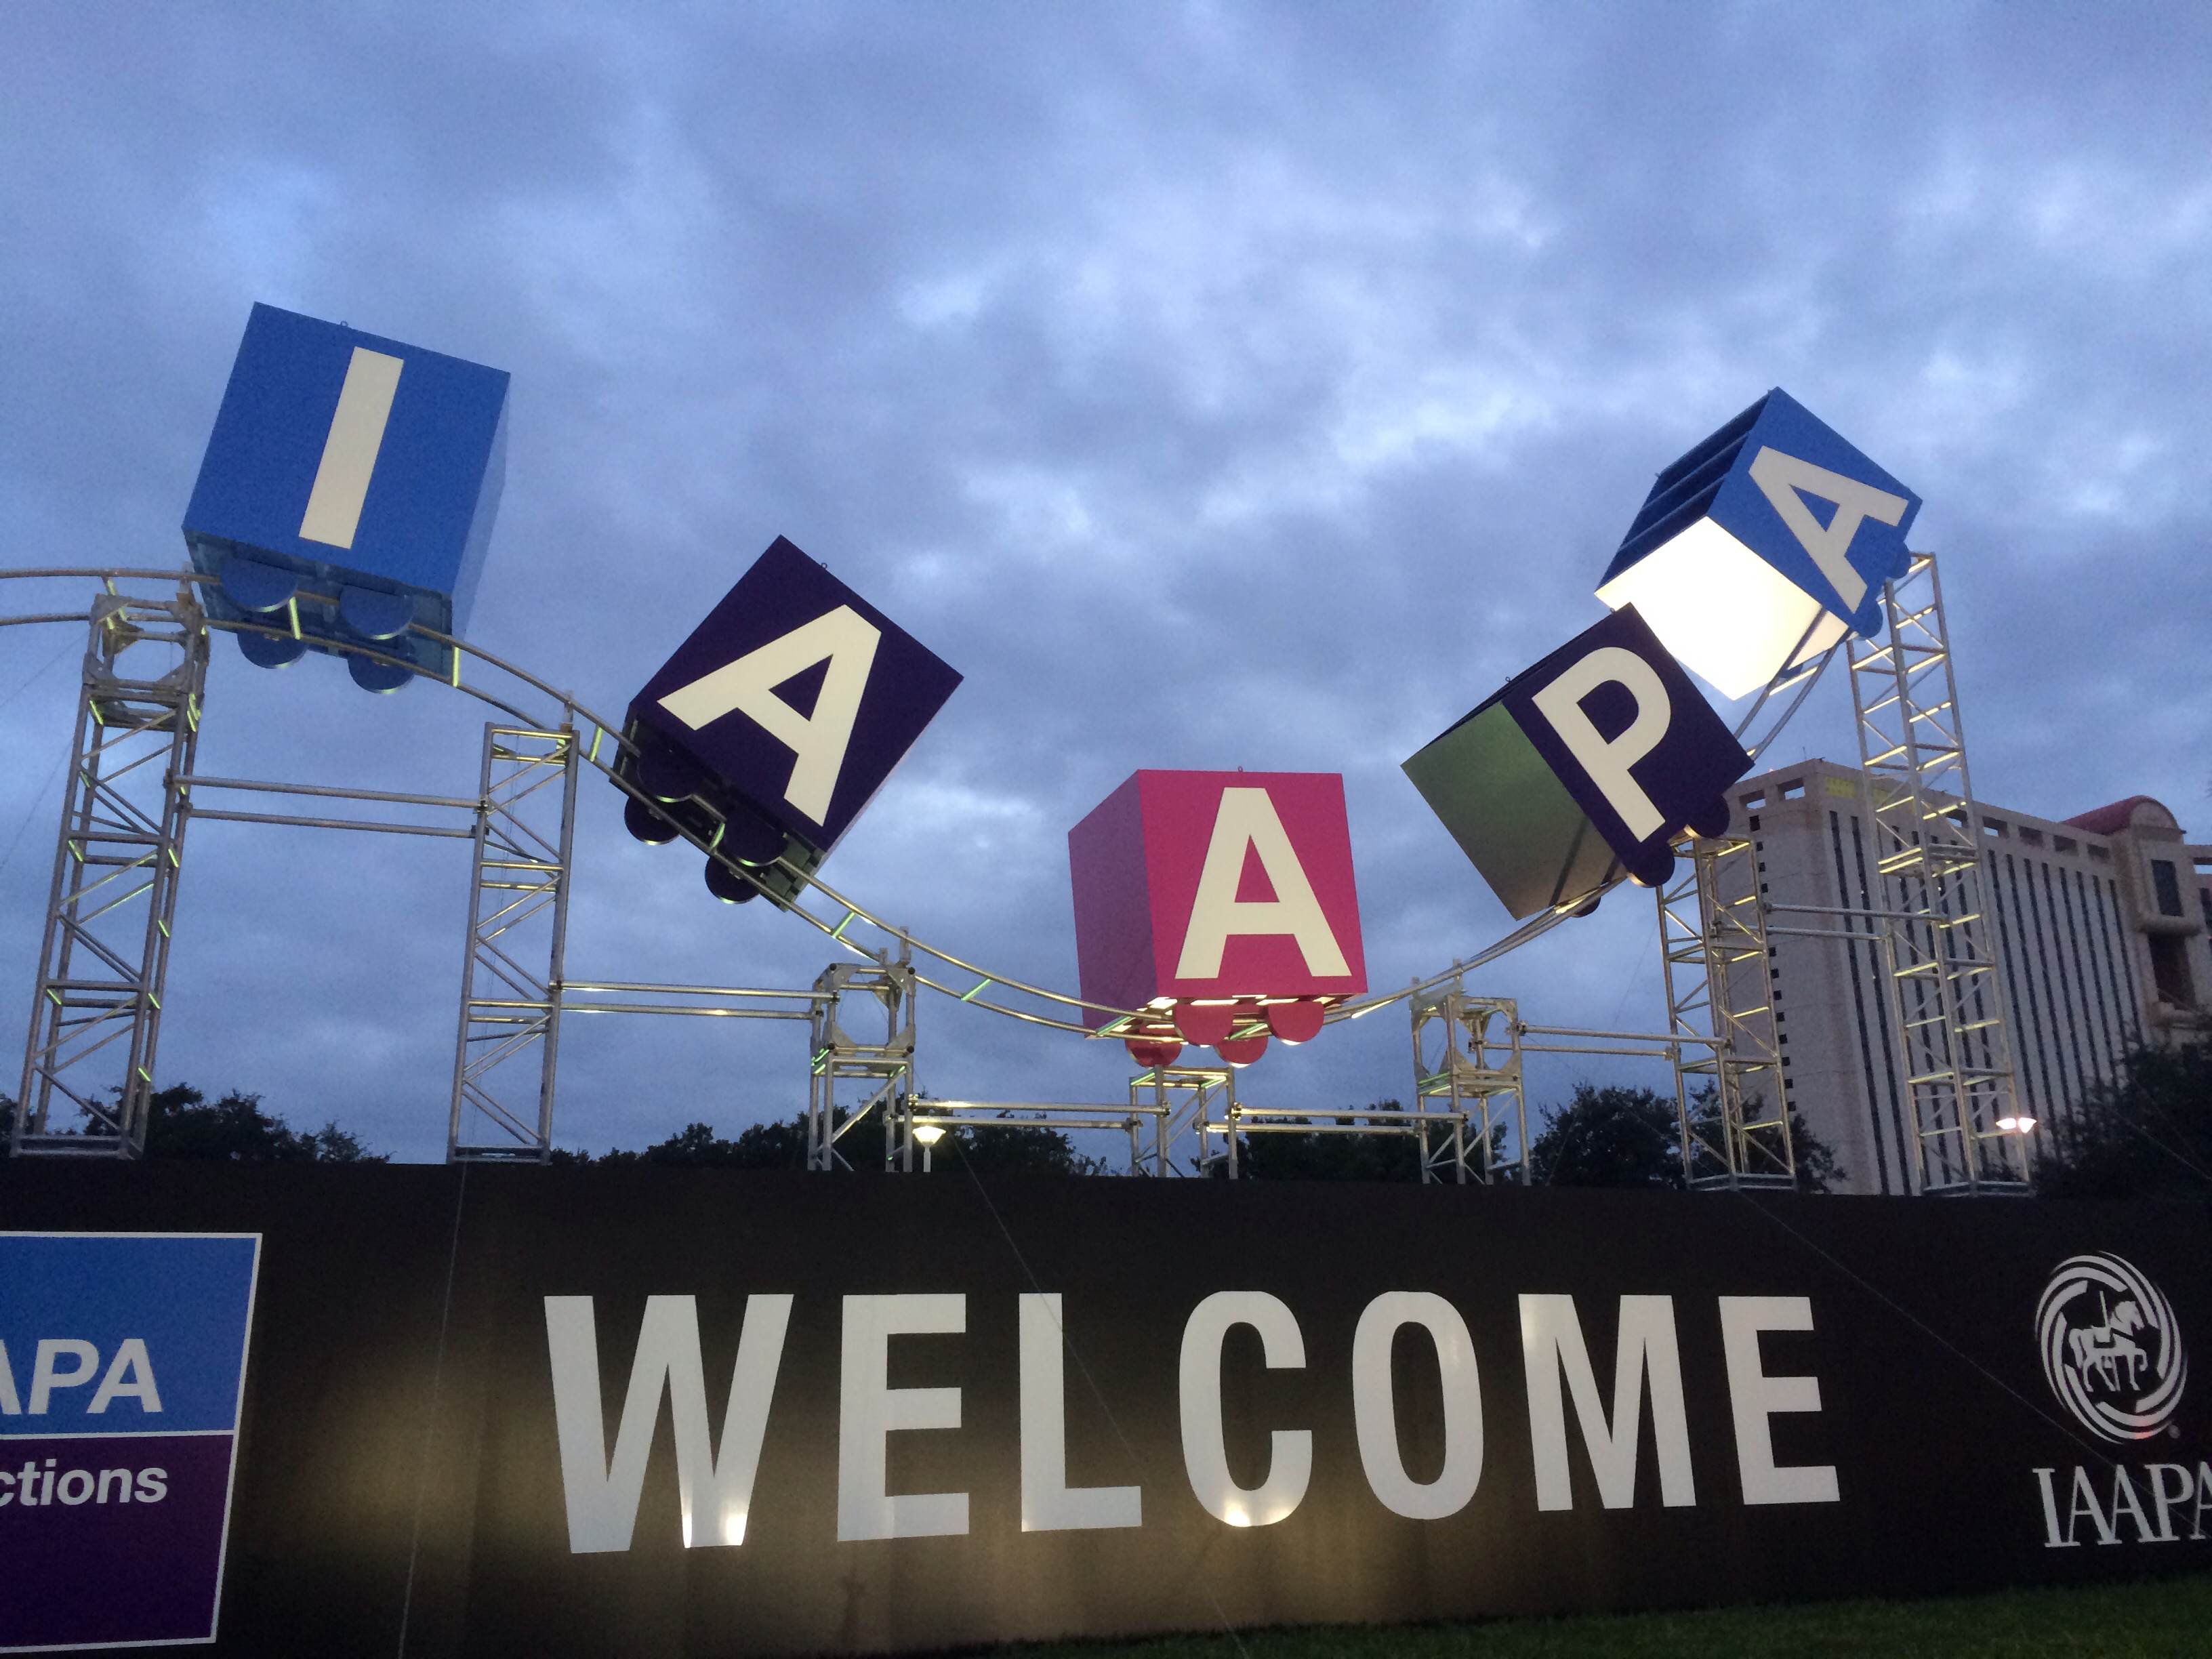 Photo Tour from the 2013 IAAPA Attractions Expo